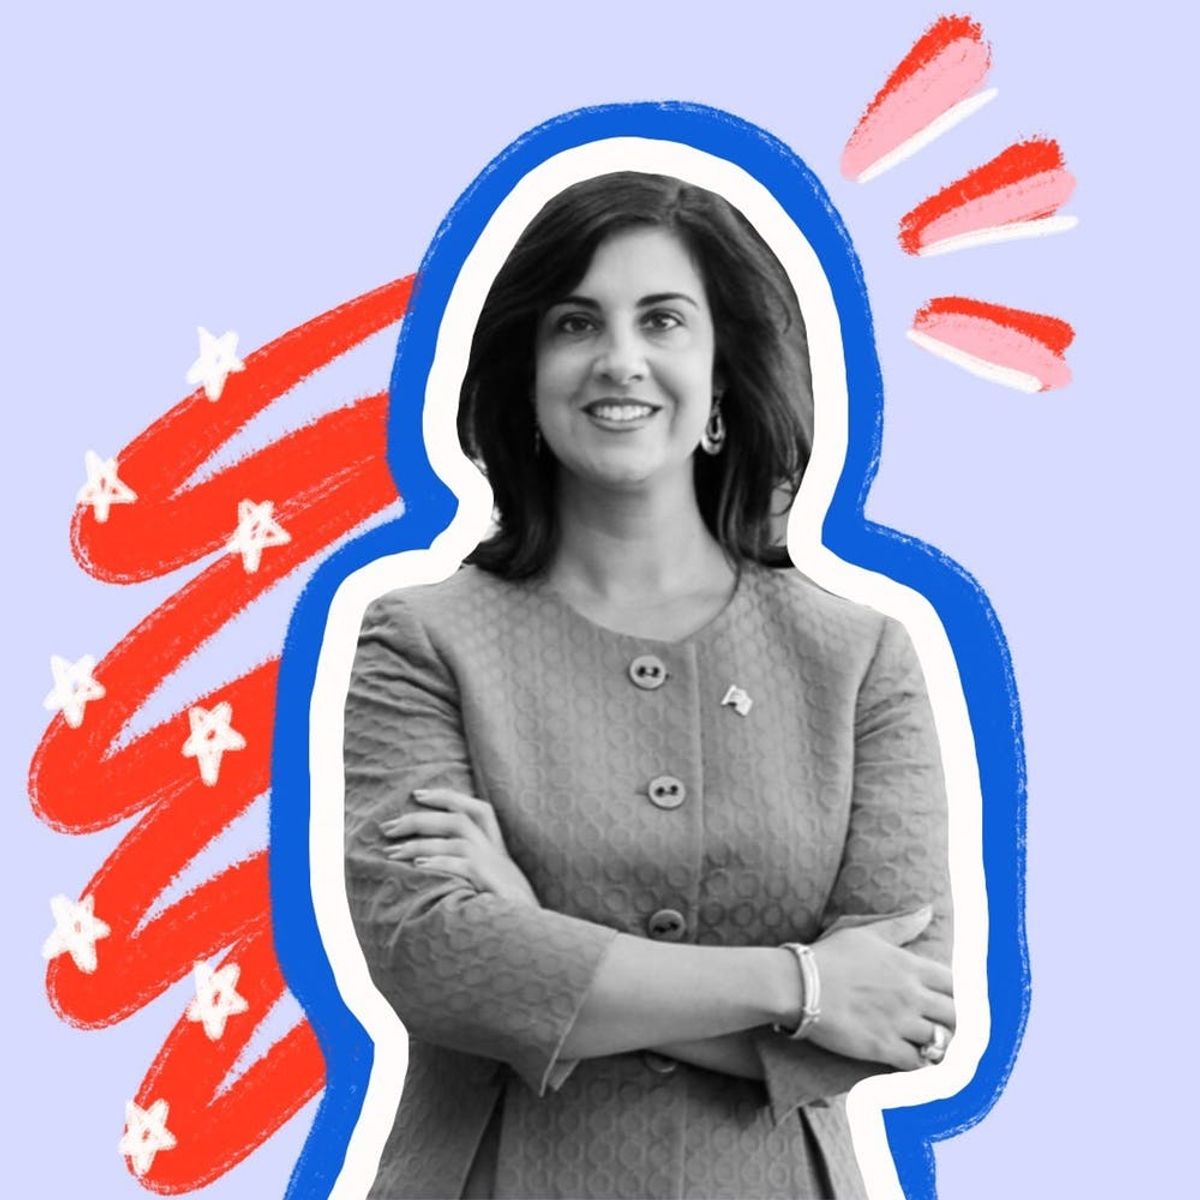 Women Who Run: Is Nicole Malliotakis About to Make History As NYC’s First Female Mayor?